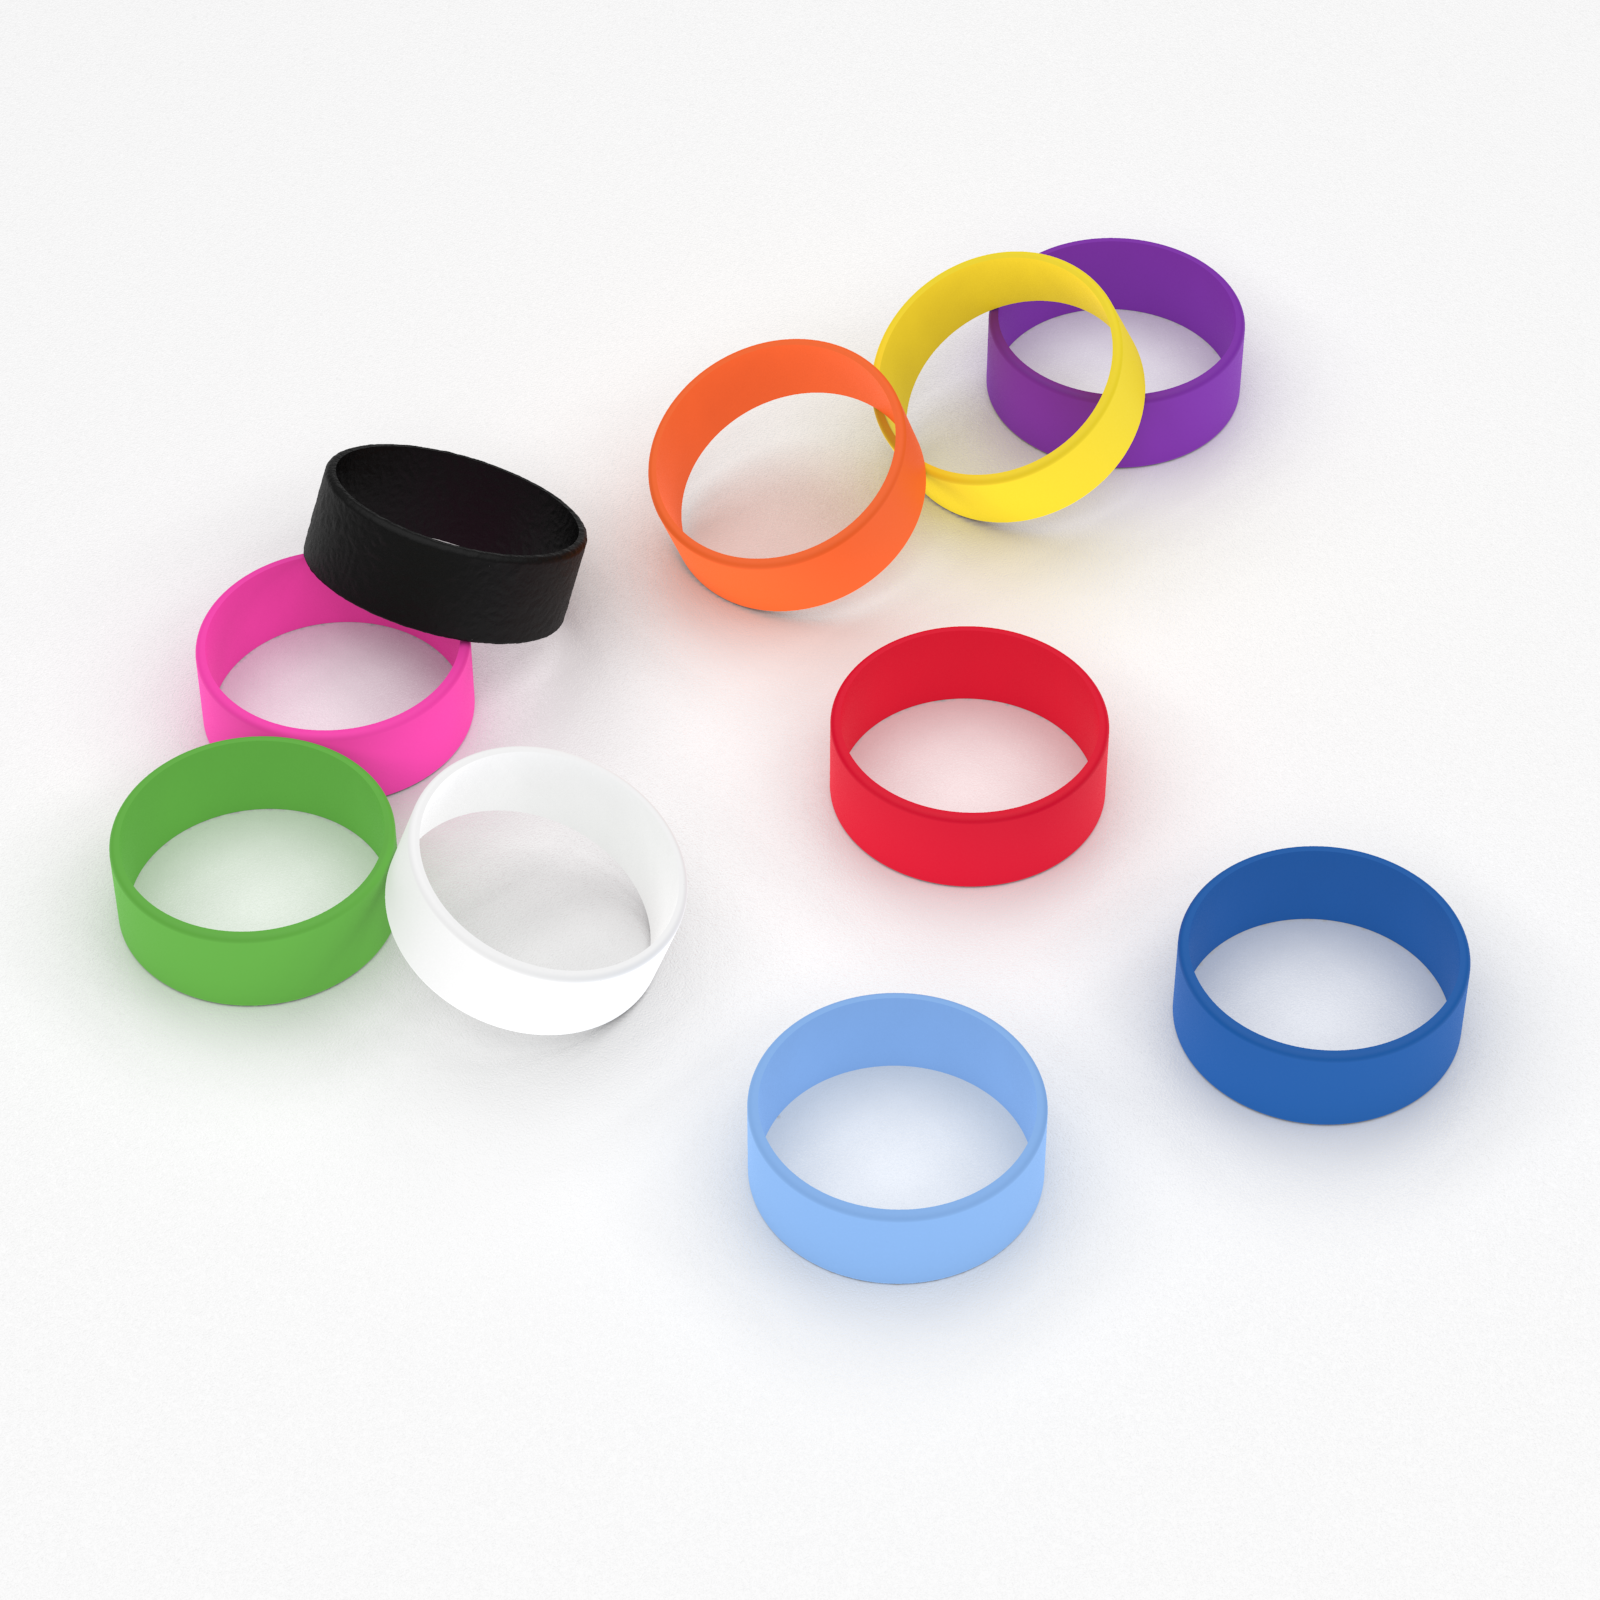 Grifiti Band Joes 3 x 0.75 inch Mini Silicone Bands for Cords Rings Gaskets Wraps - Grifiti